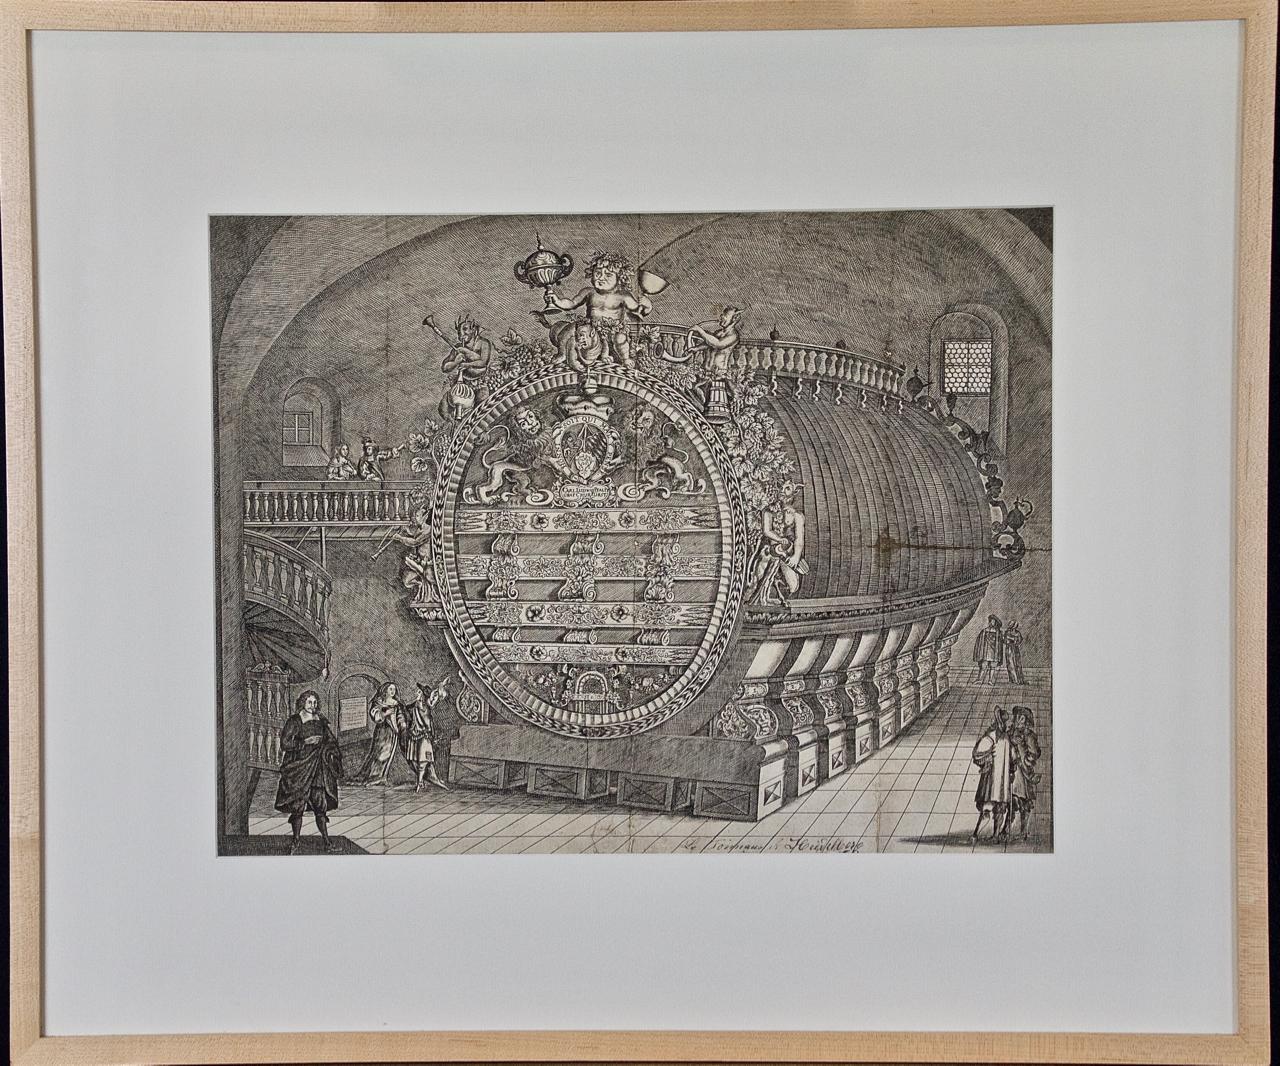 « The Heidelberg Tun : A Framed 17th Century Engraving of a Huge Wine Cask »